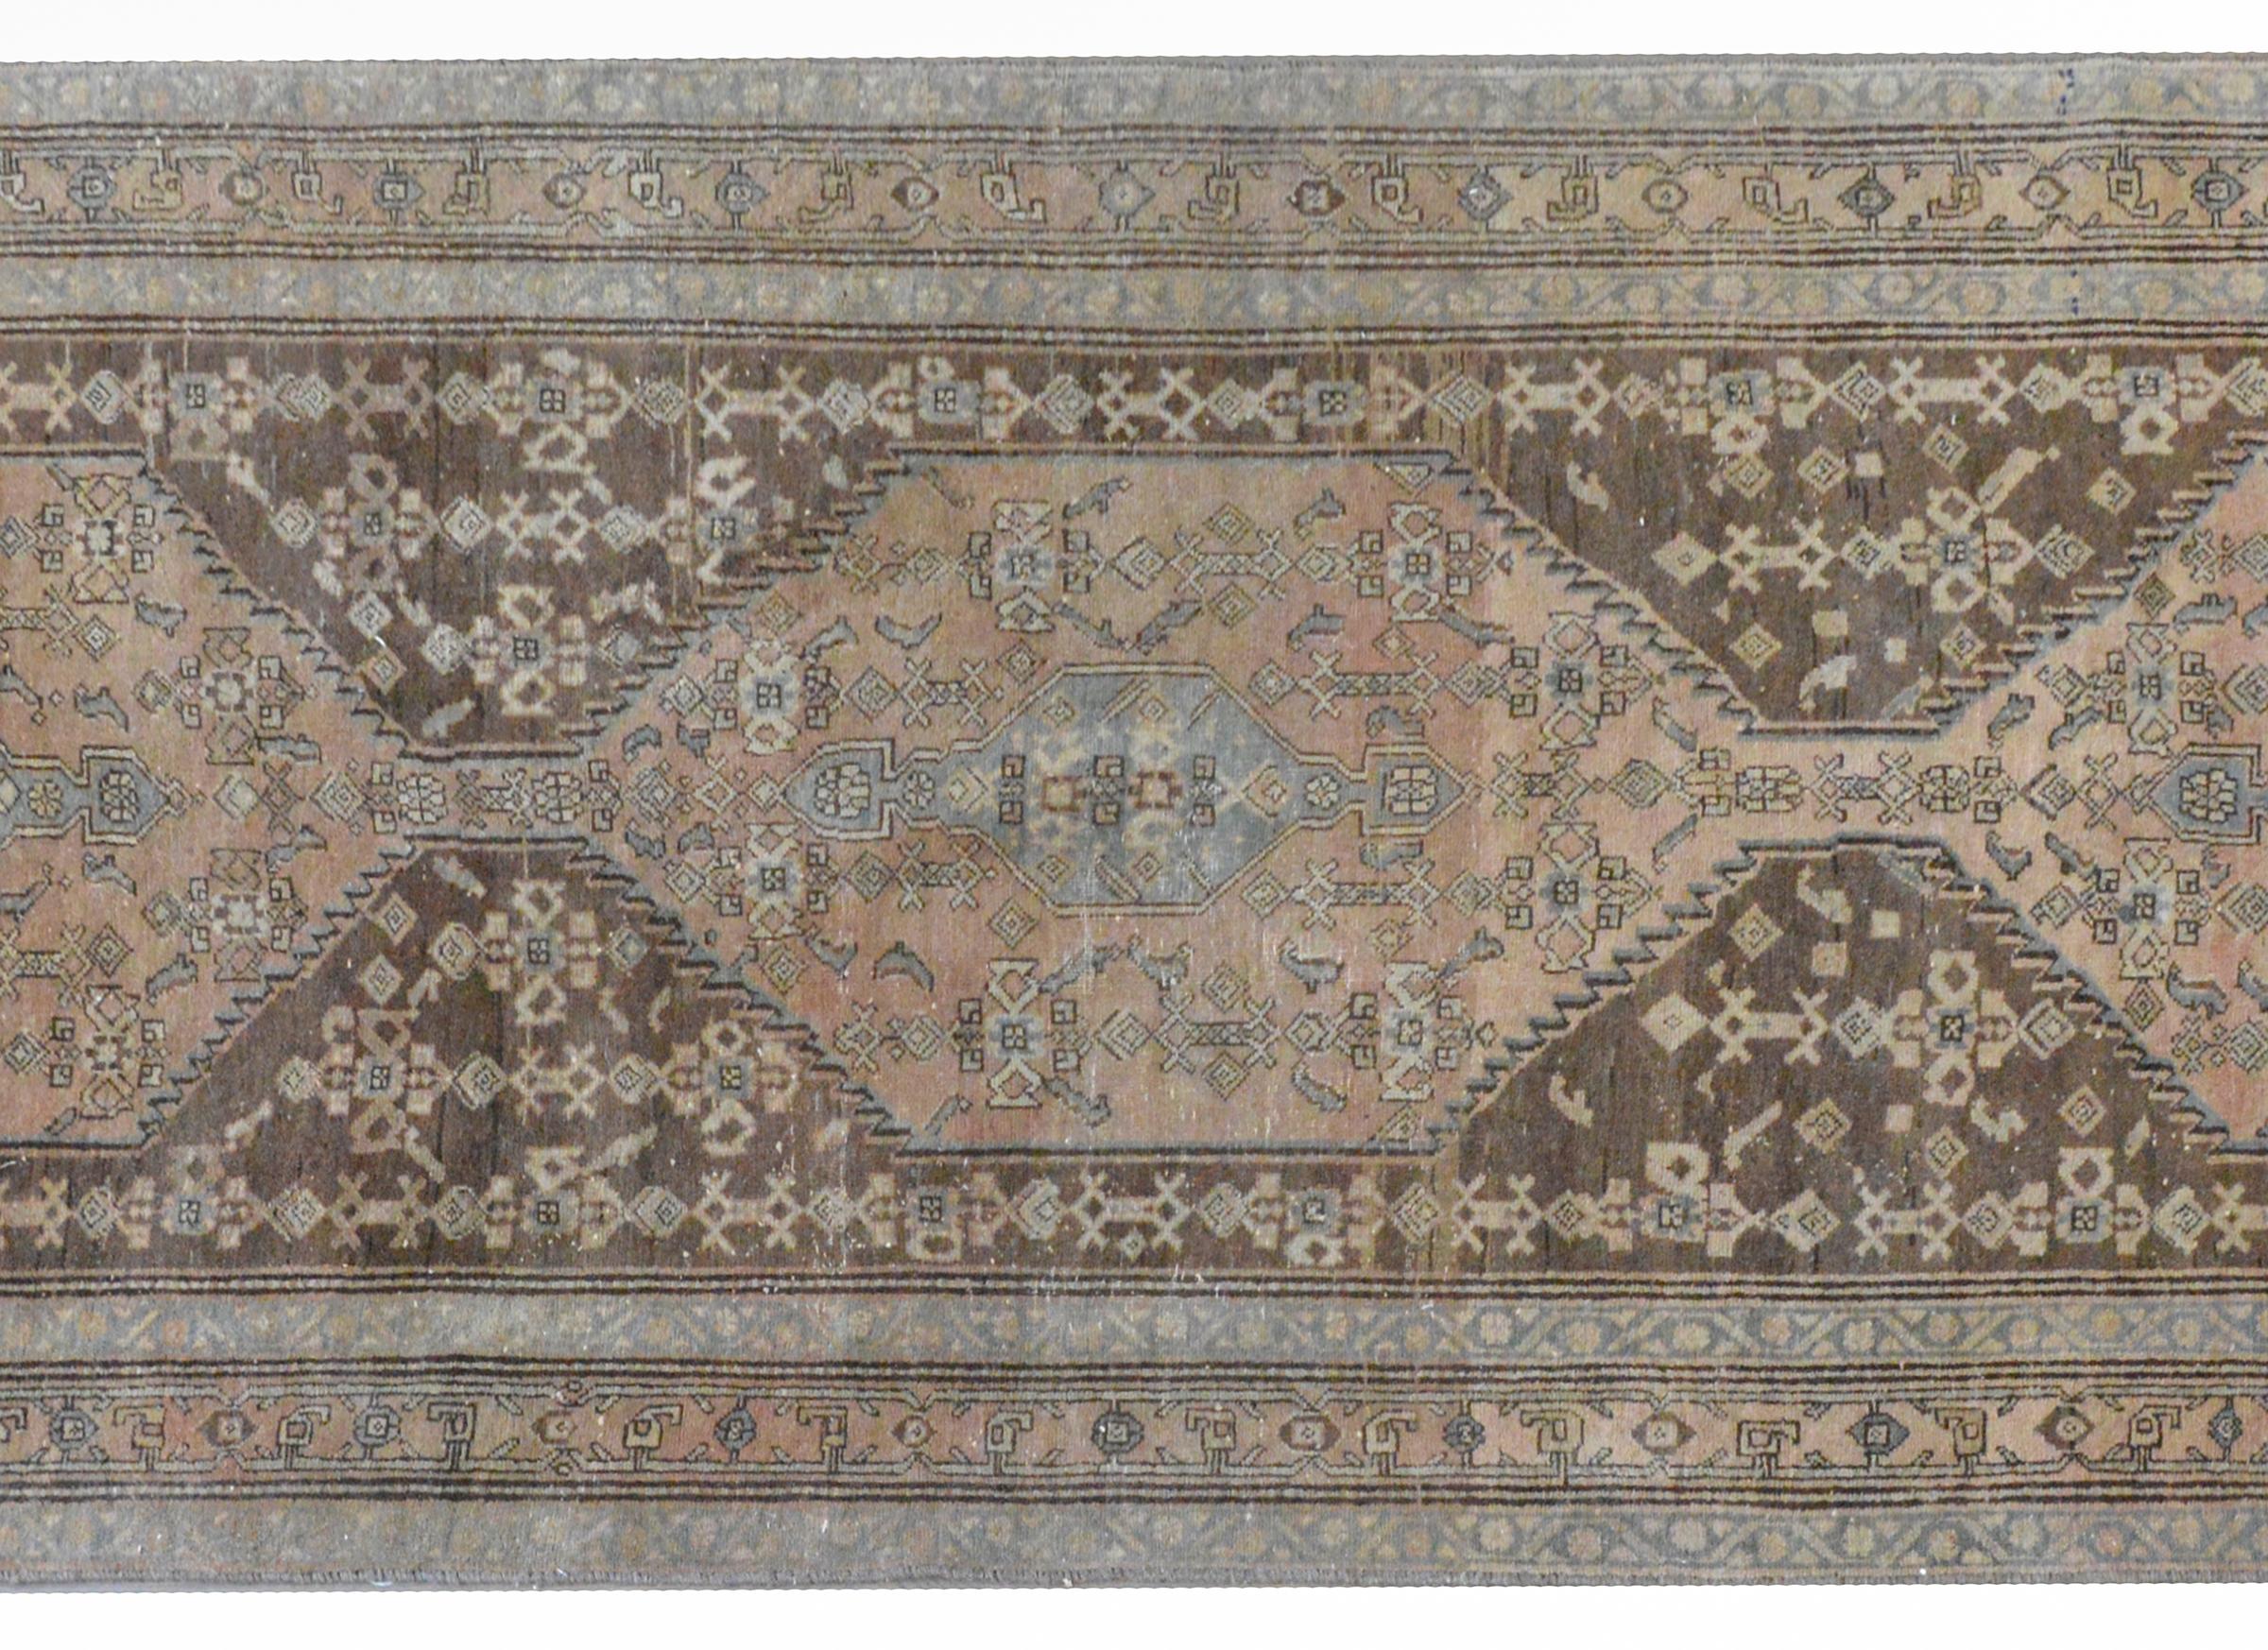 A wonderful mid-20th century Northwest Persian runner with three large medallions woven with stylized floral and vine patterns against an Abrash pale orange field, and surrounded by a pattern of more stylized flowers against a brown ground. This rug